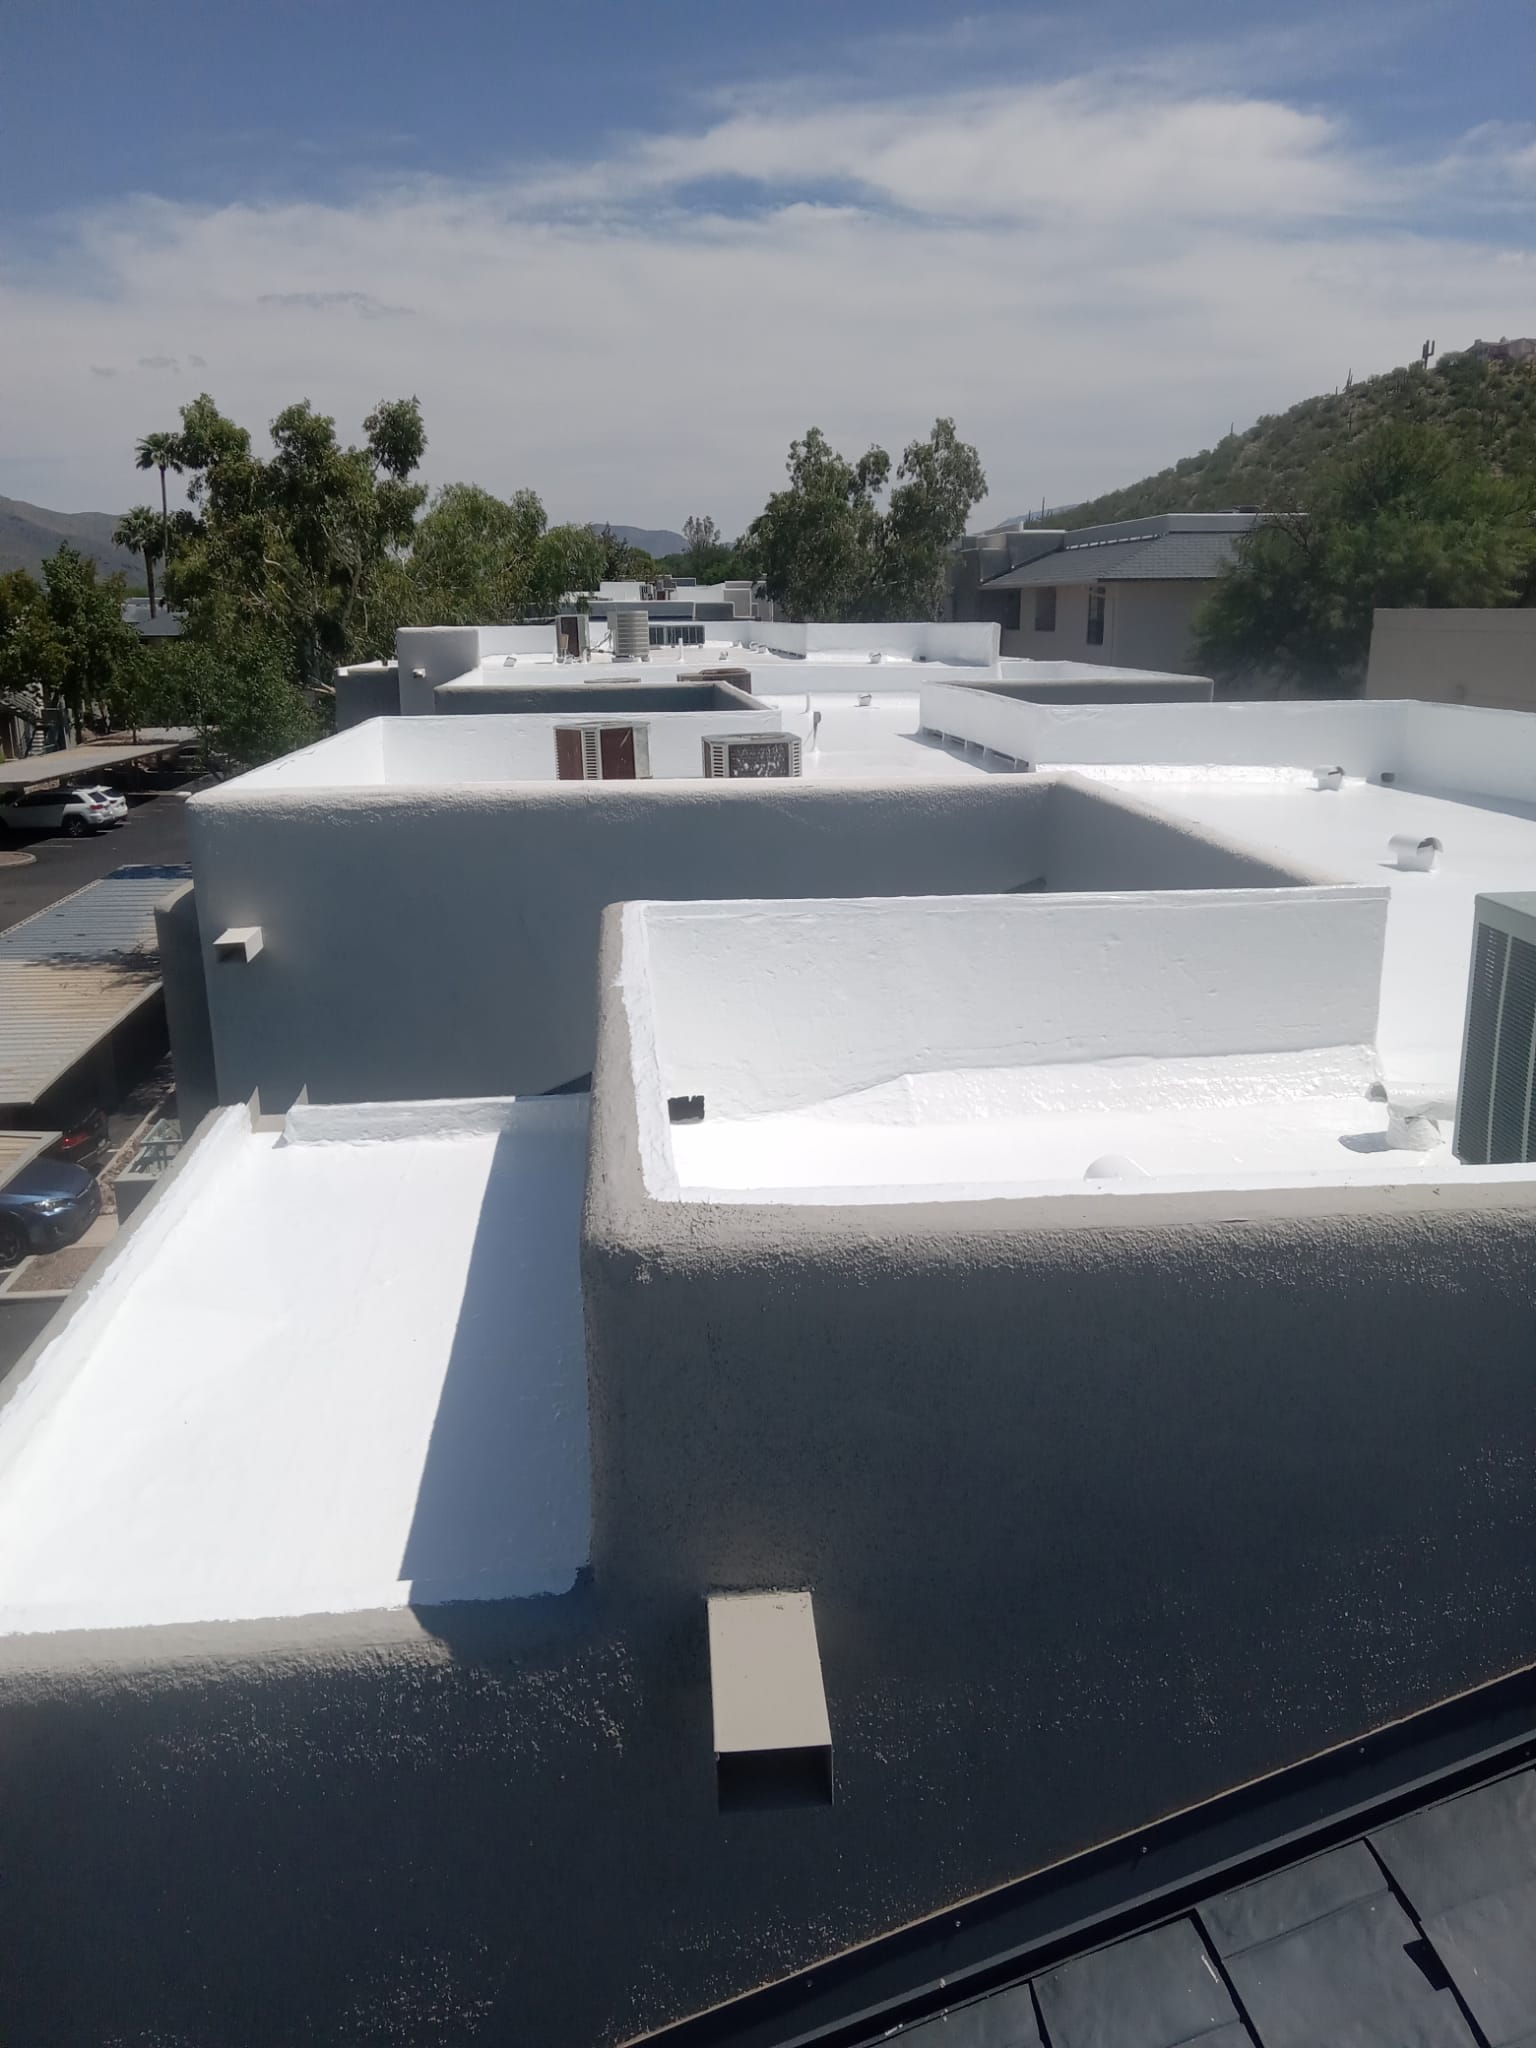 Desert Ridge's expansive residential complex roof receiving a spray foam and coating upgrade, enhancing building sustainability.